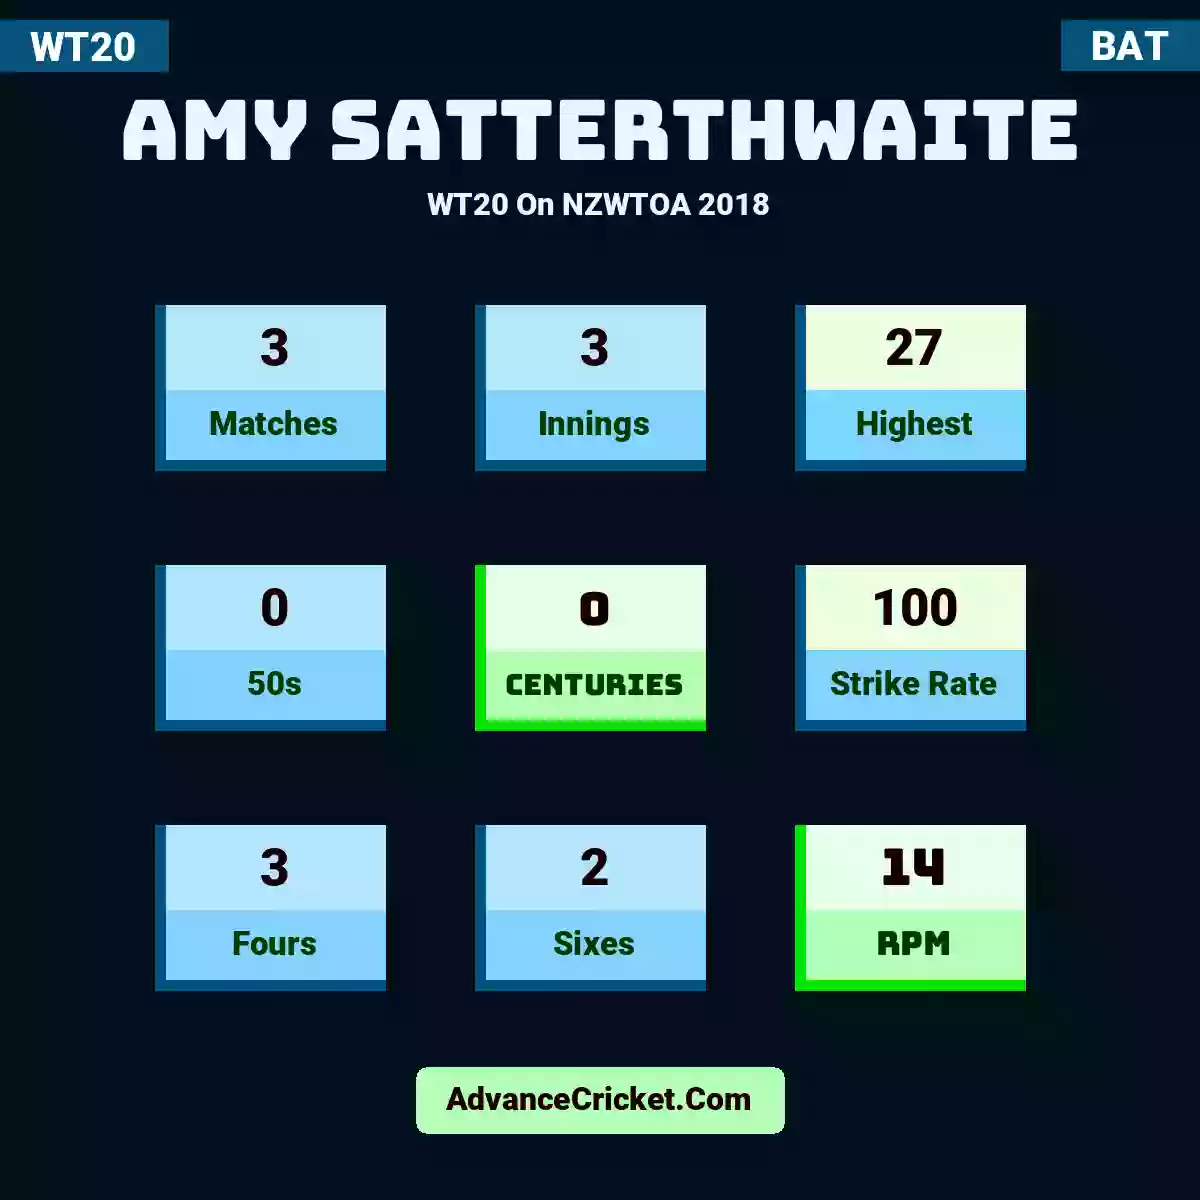 Amy Satterthwaite WT20  On NZWTOA 2018, Amy Satterthwaite played 3 matches, scored 27 runs as highest, 0 half-centuries, and 0 centuries, with a strike rate of 100. A.Satterthwaite hit 3 fours and 2 sixes, with an RPM of 14.